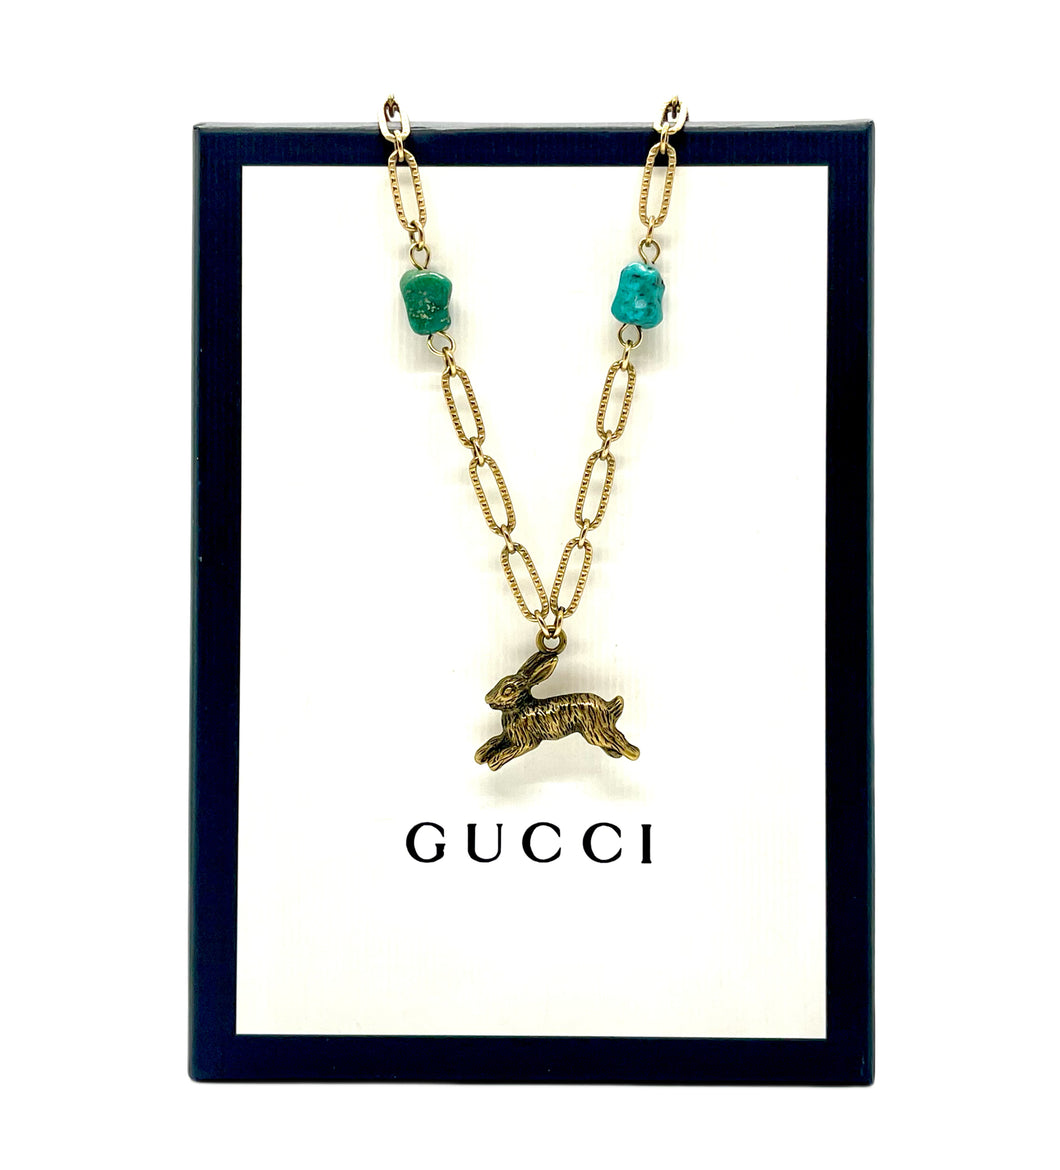 Repurposed Gucci Bunny Charm & Vintage Turquesa Chain Necklace